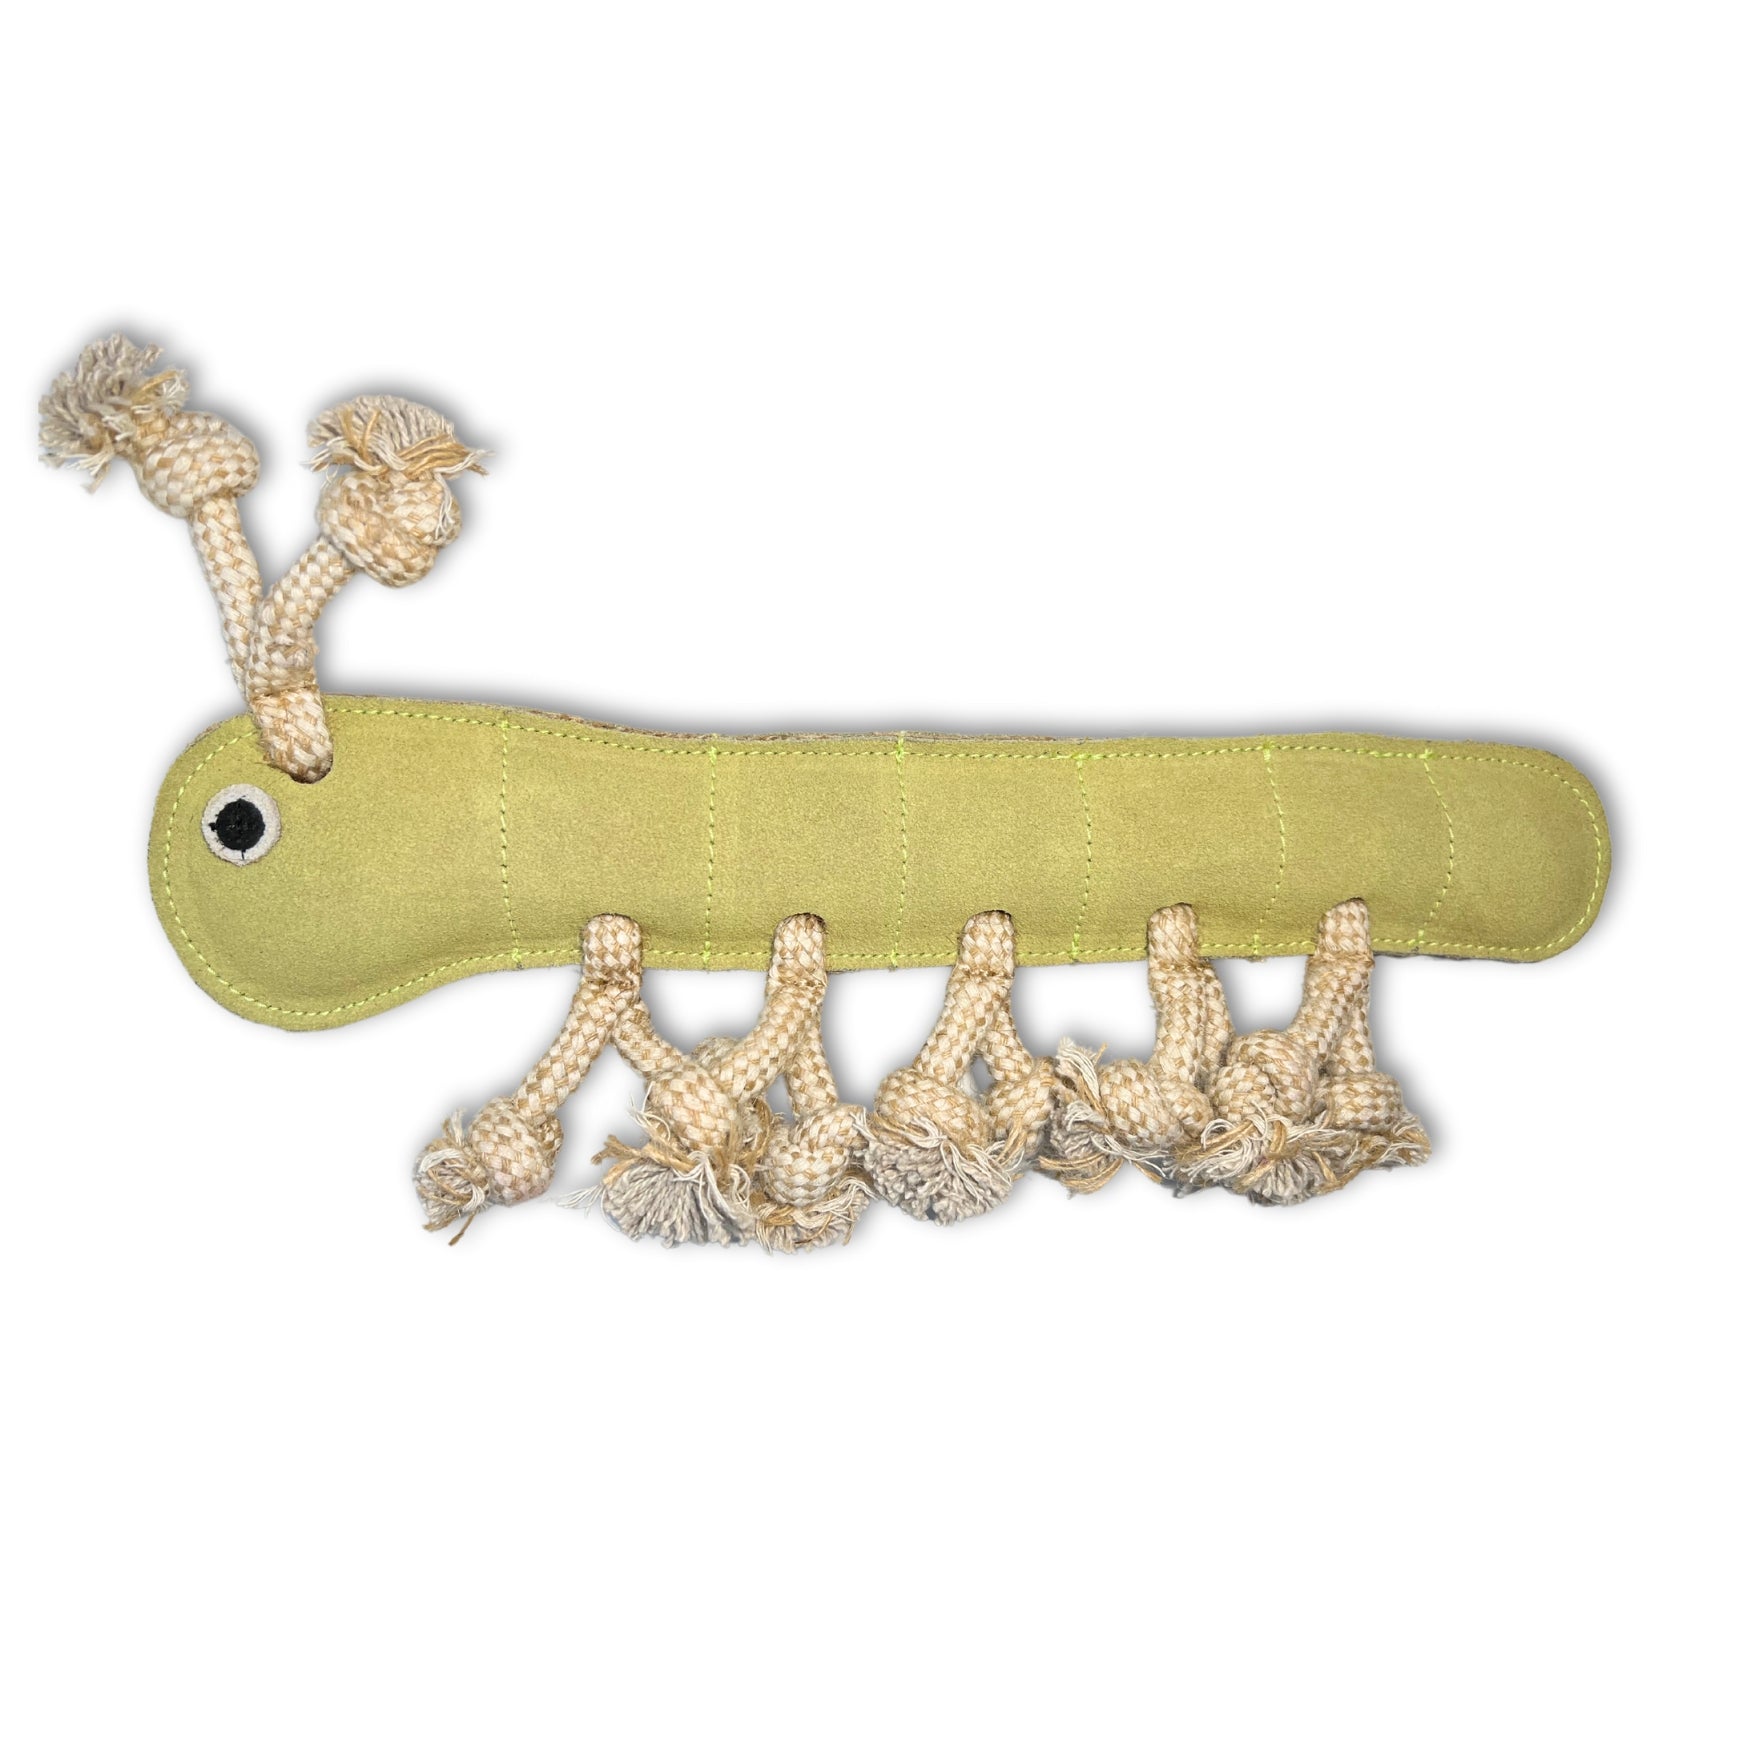 A plush Gerti the Grub - pear dog toy made of green, sustainable fabric with rope segments and knots representing legs, featuring a single stitched eye and antennae, designed for interactive play and chewing. Created by Georgie Paws.